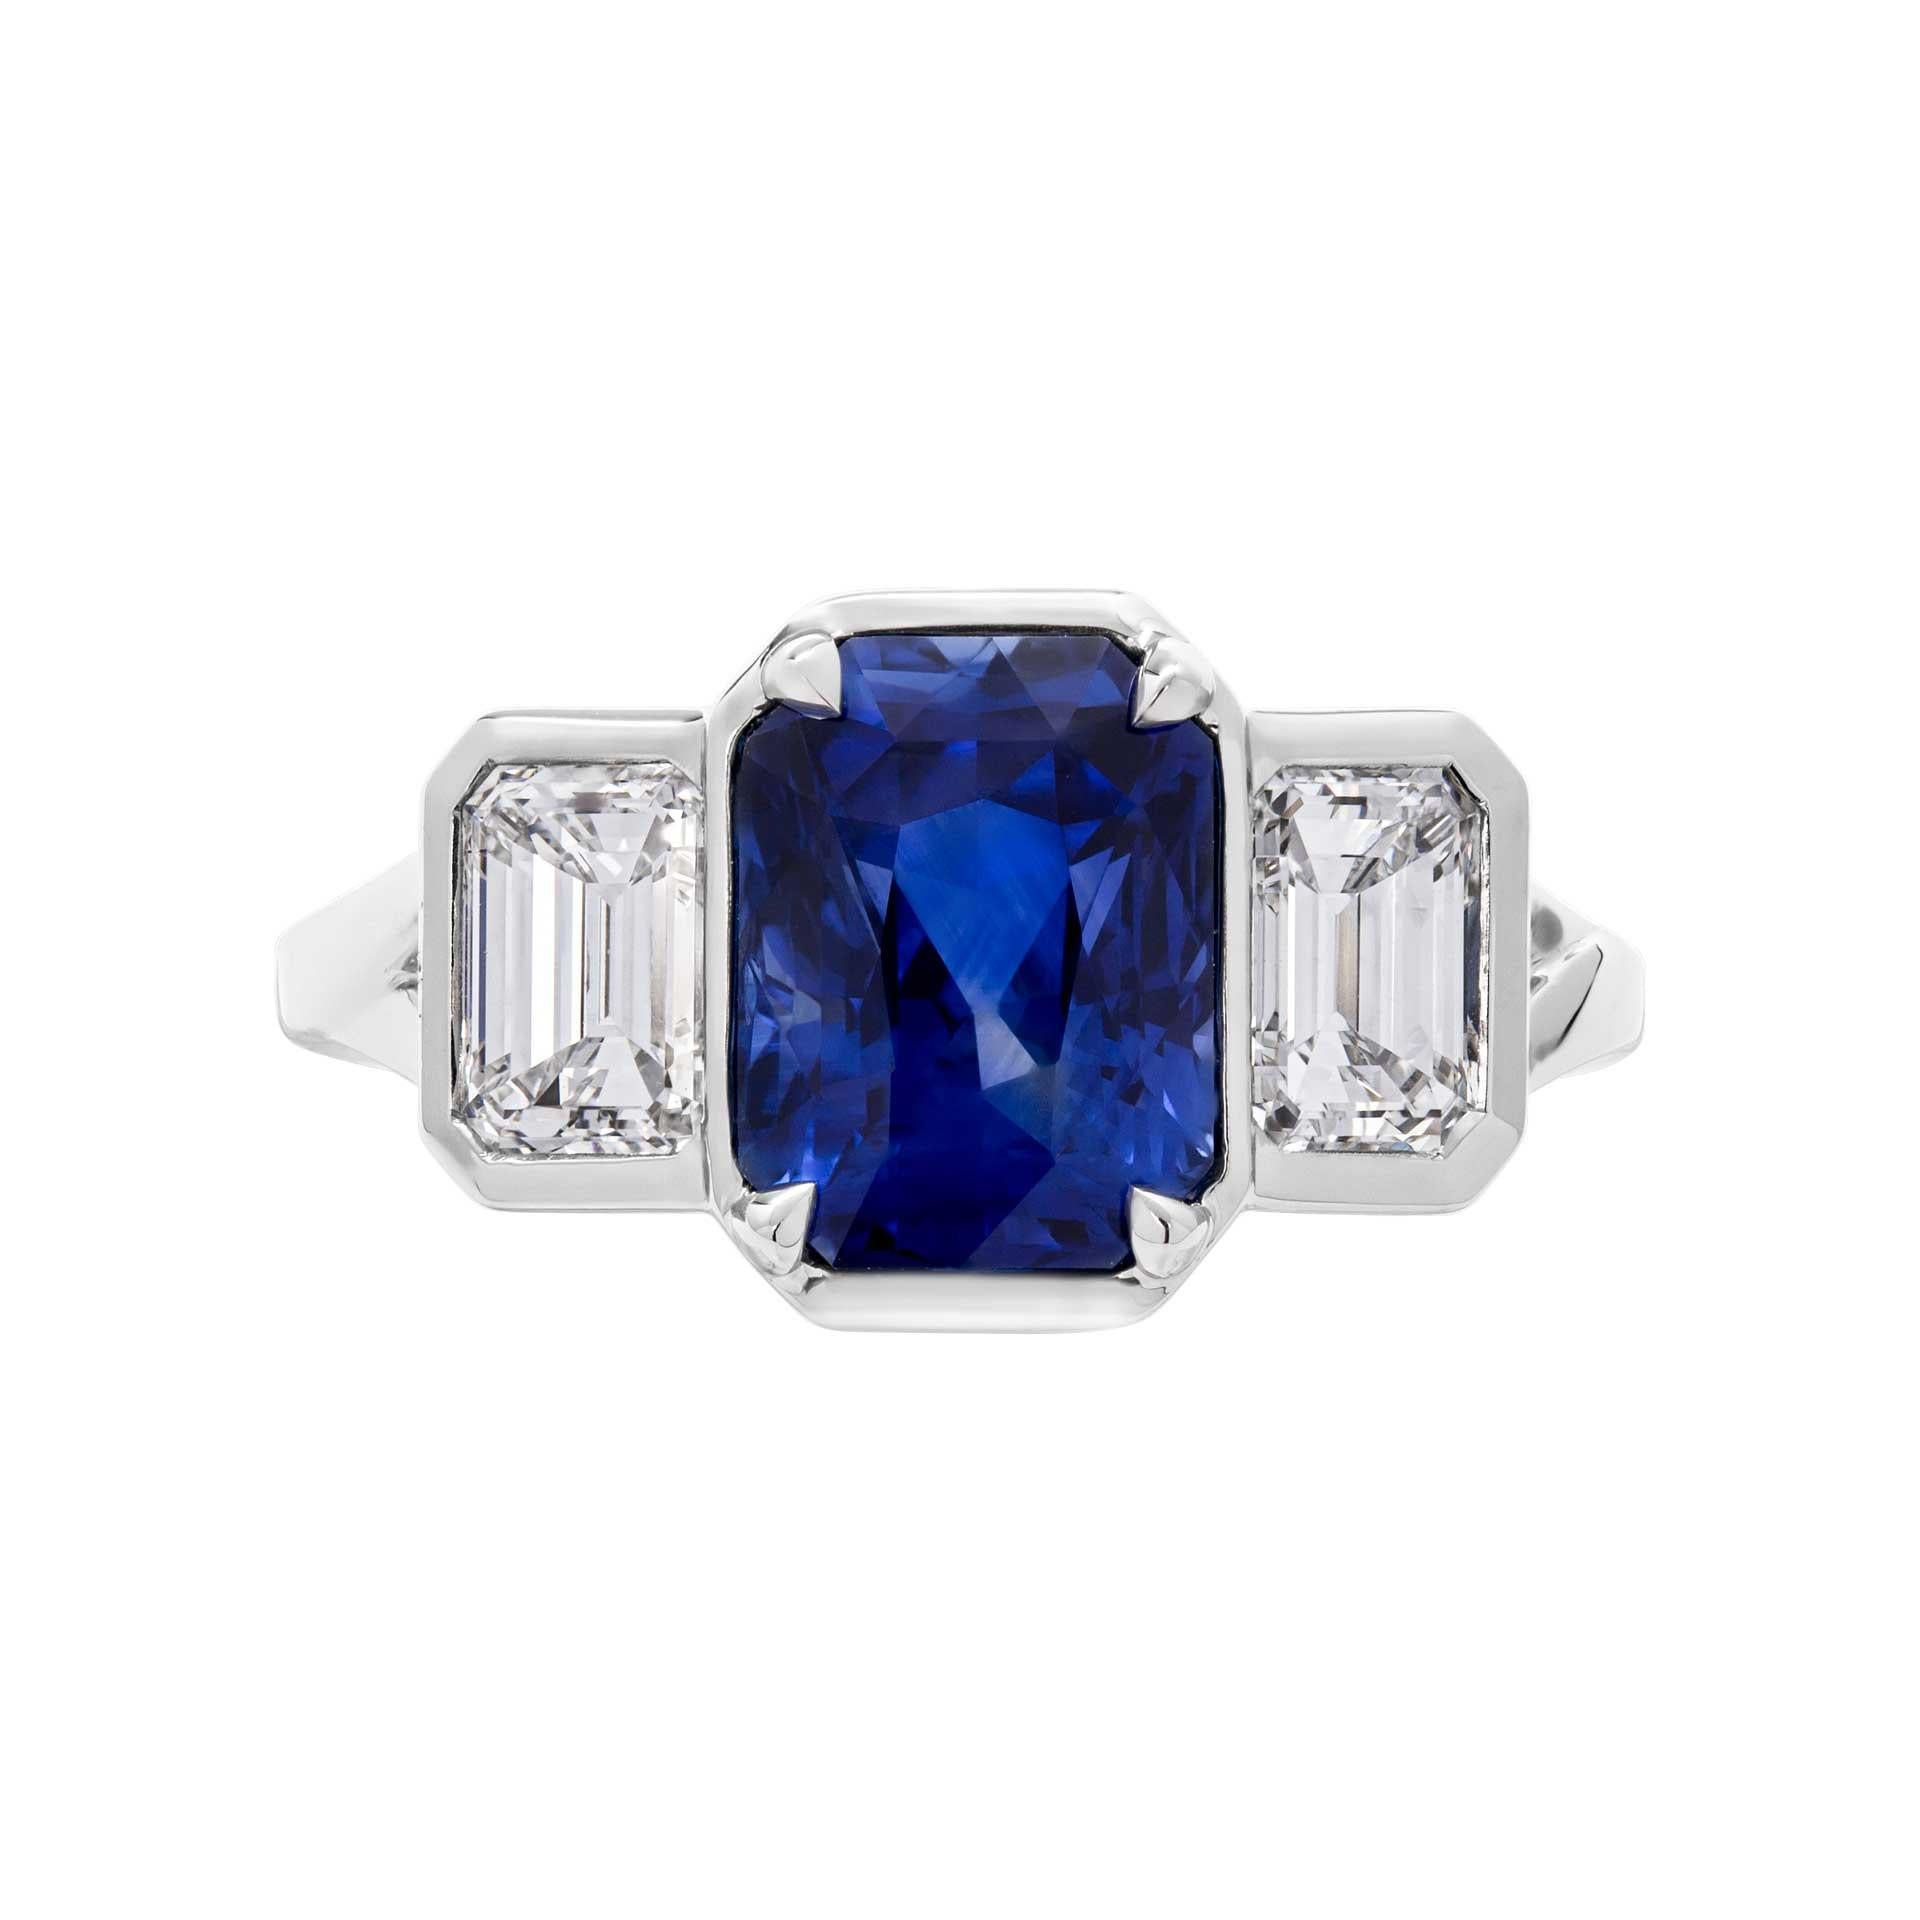 Inspired by modern influence and graphic lines , this Sapphire 3 stone ring will steal your heard with it`s beauty!
Delicate, yet bold mounted in Platinum with 3.31ct Radiant Shape Sapphire  and side stones emerald cut diamonds totaling 1.25ct G-H